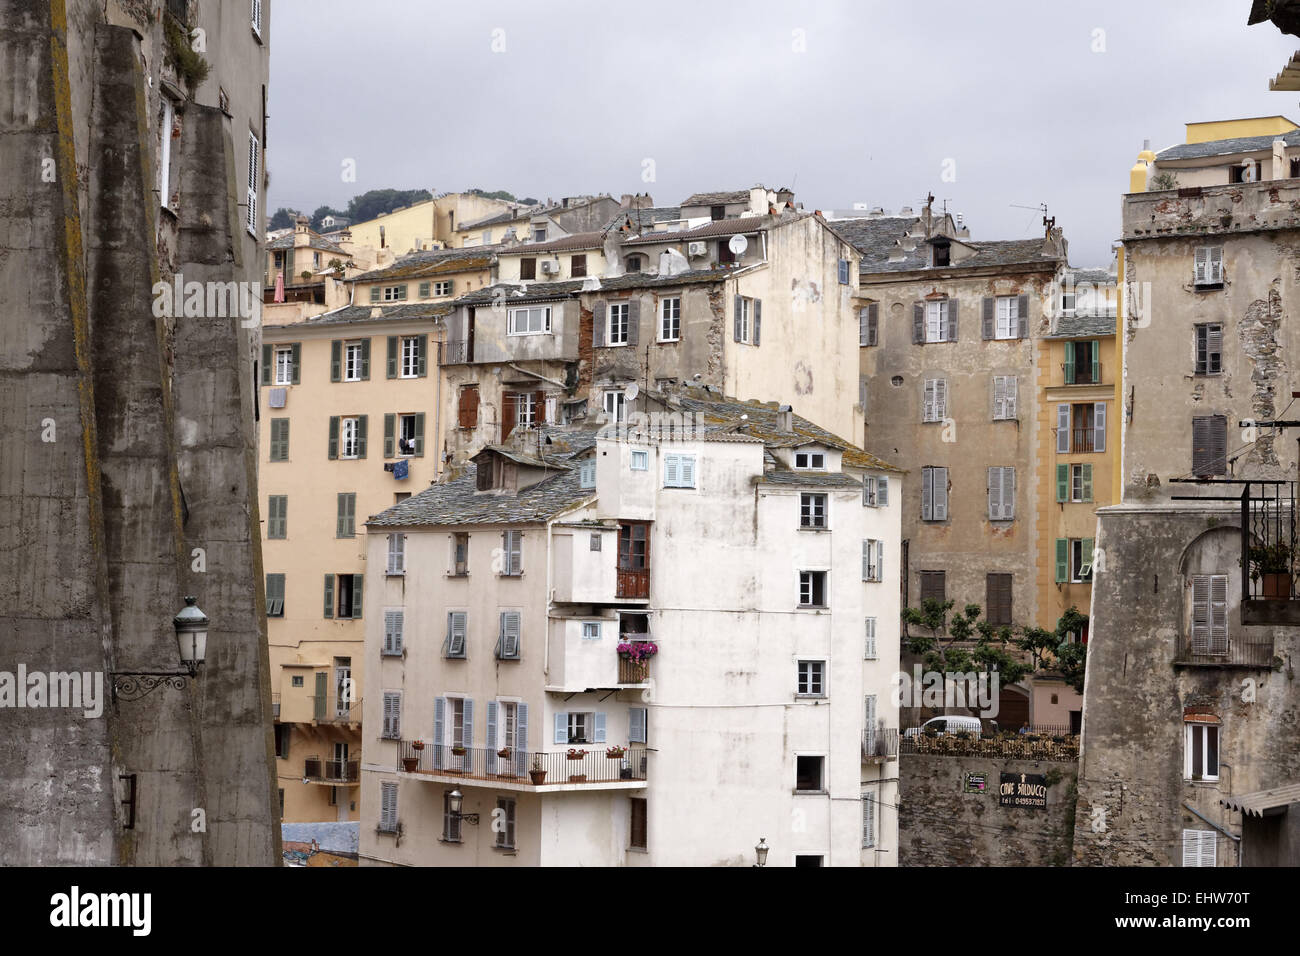 In the old town of Bastia, Corsica, France Stock Photo